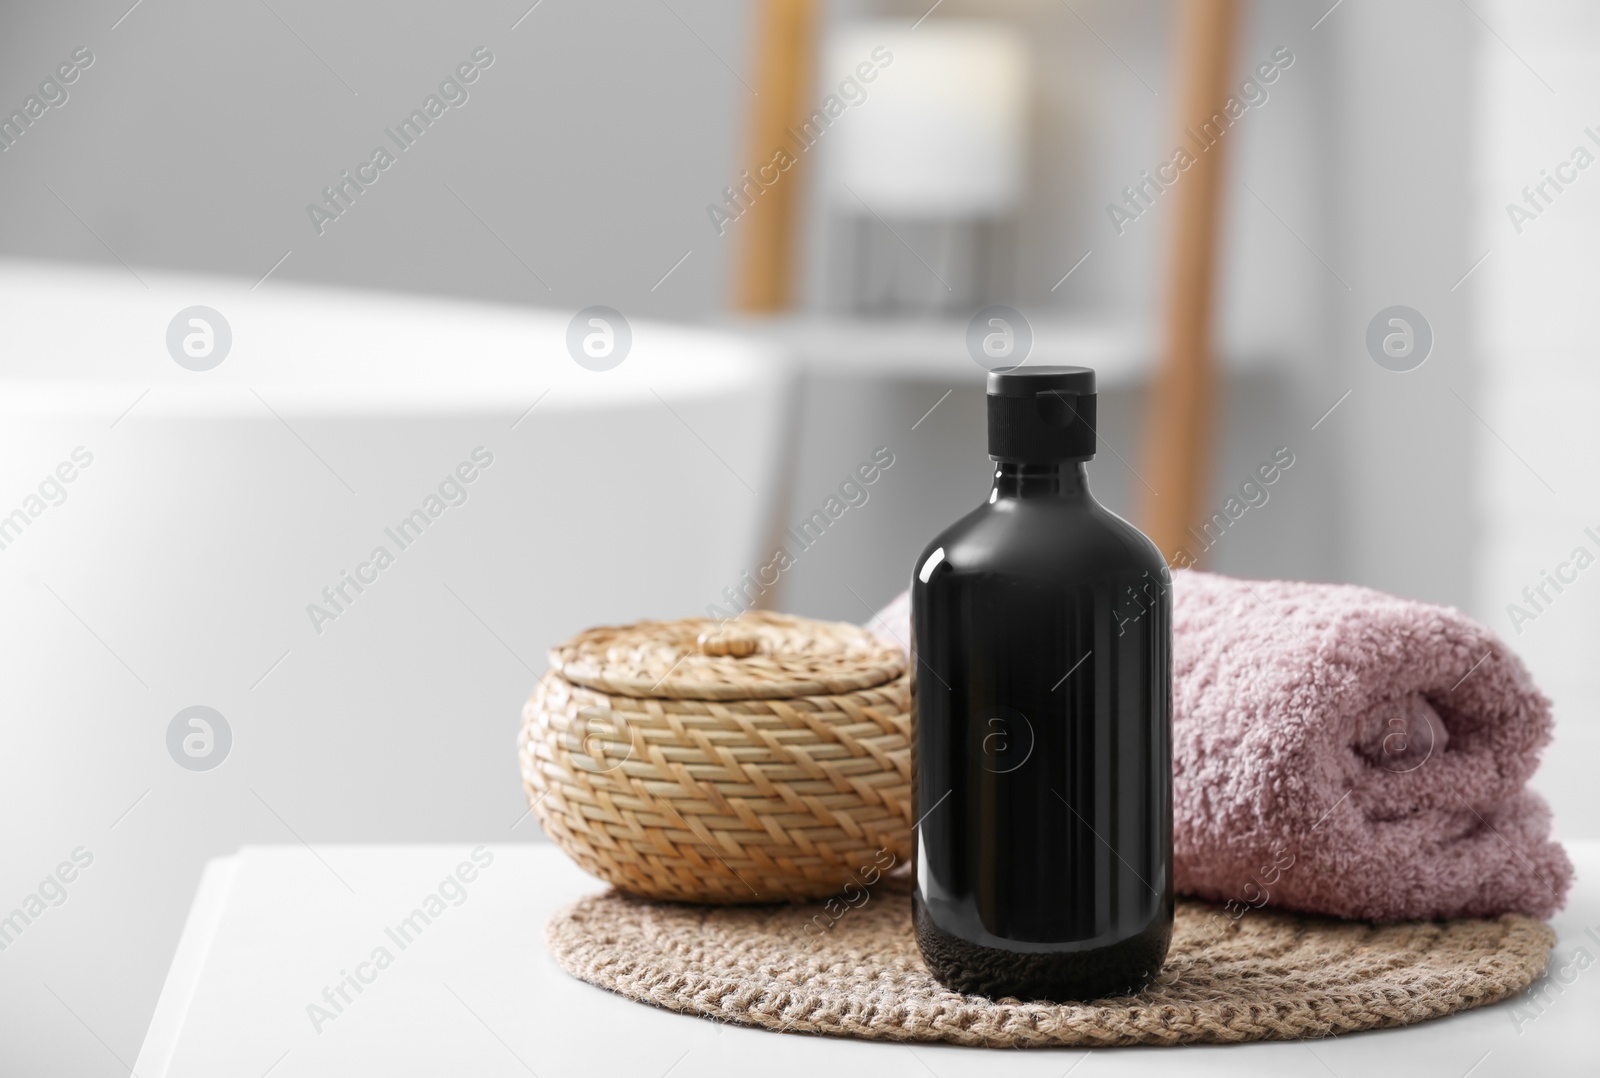 Photo of Bottle of bubble bath, towel and wicker box on white table in bathroom, space for text